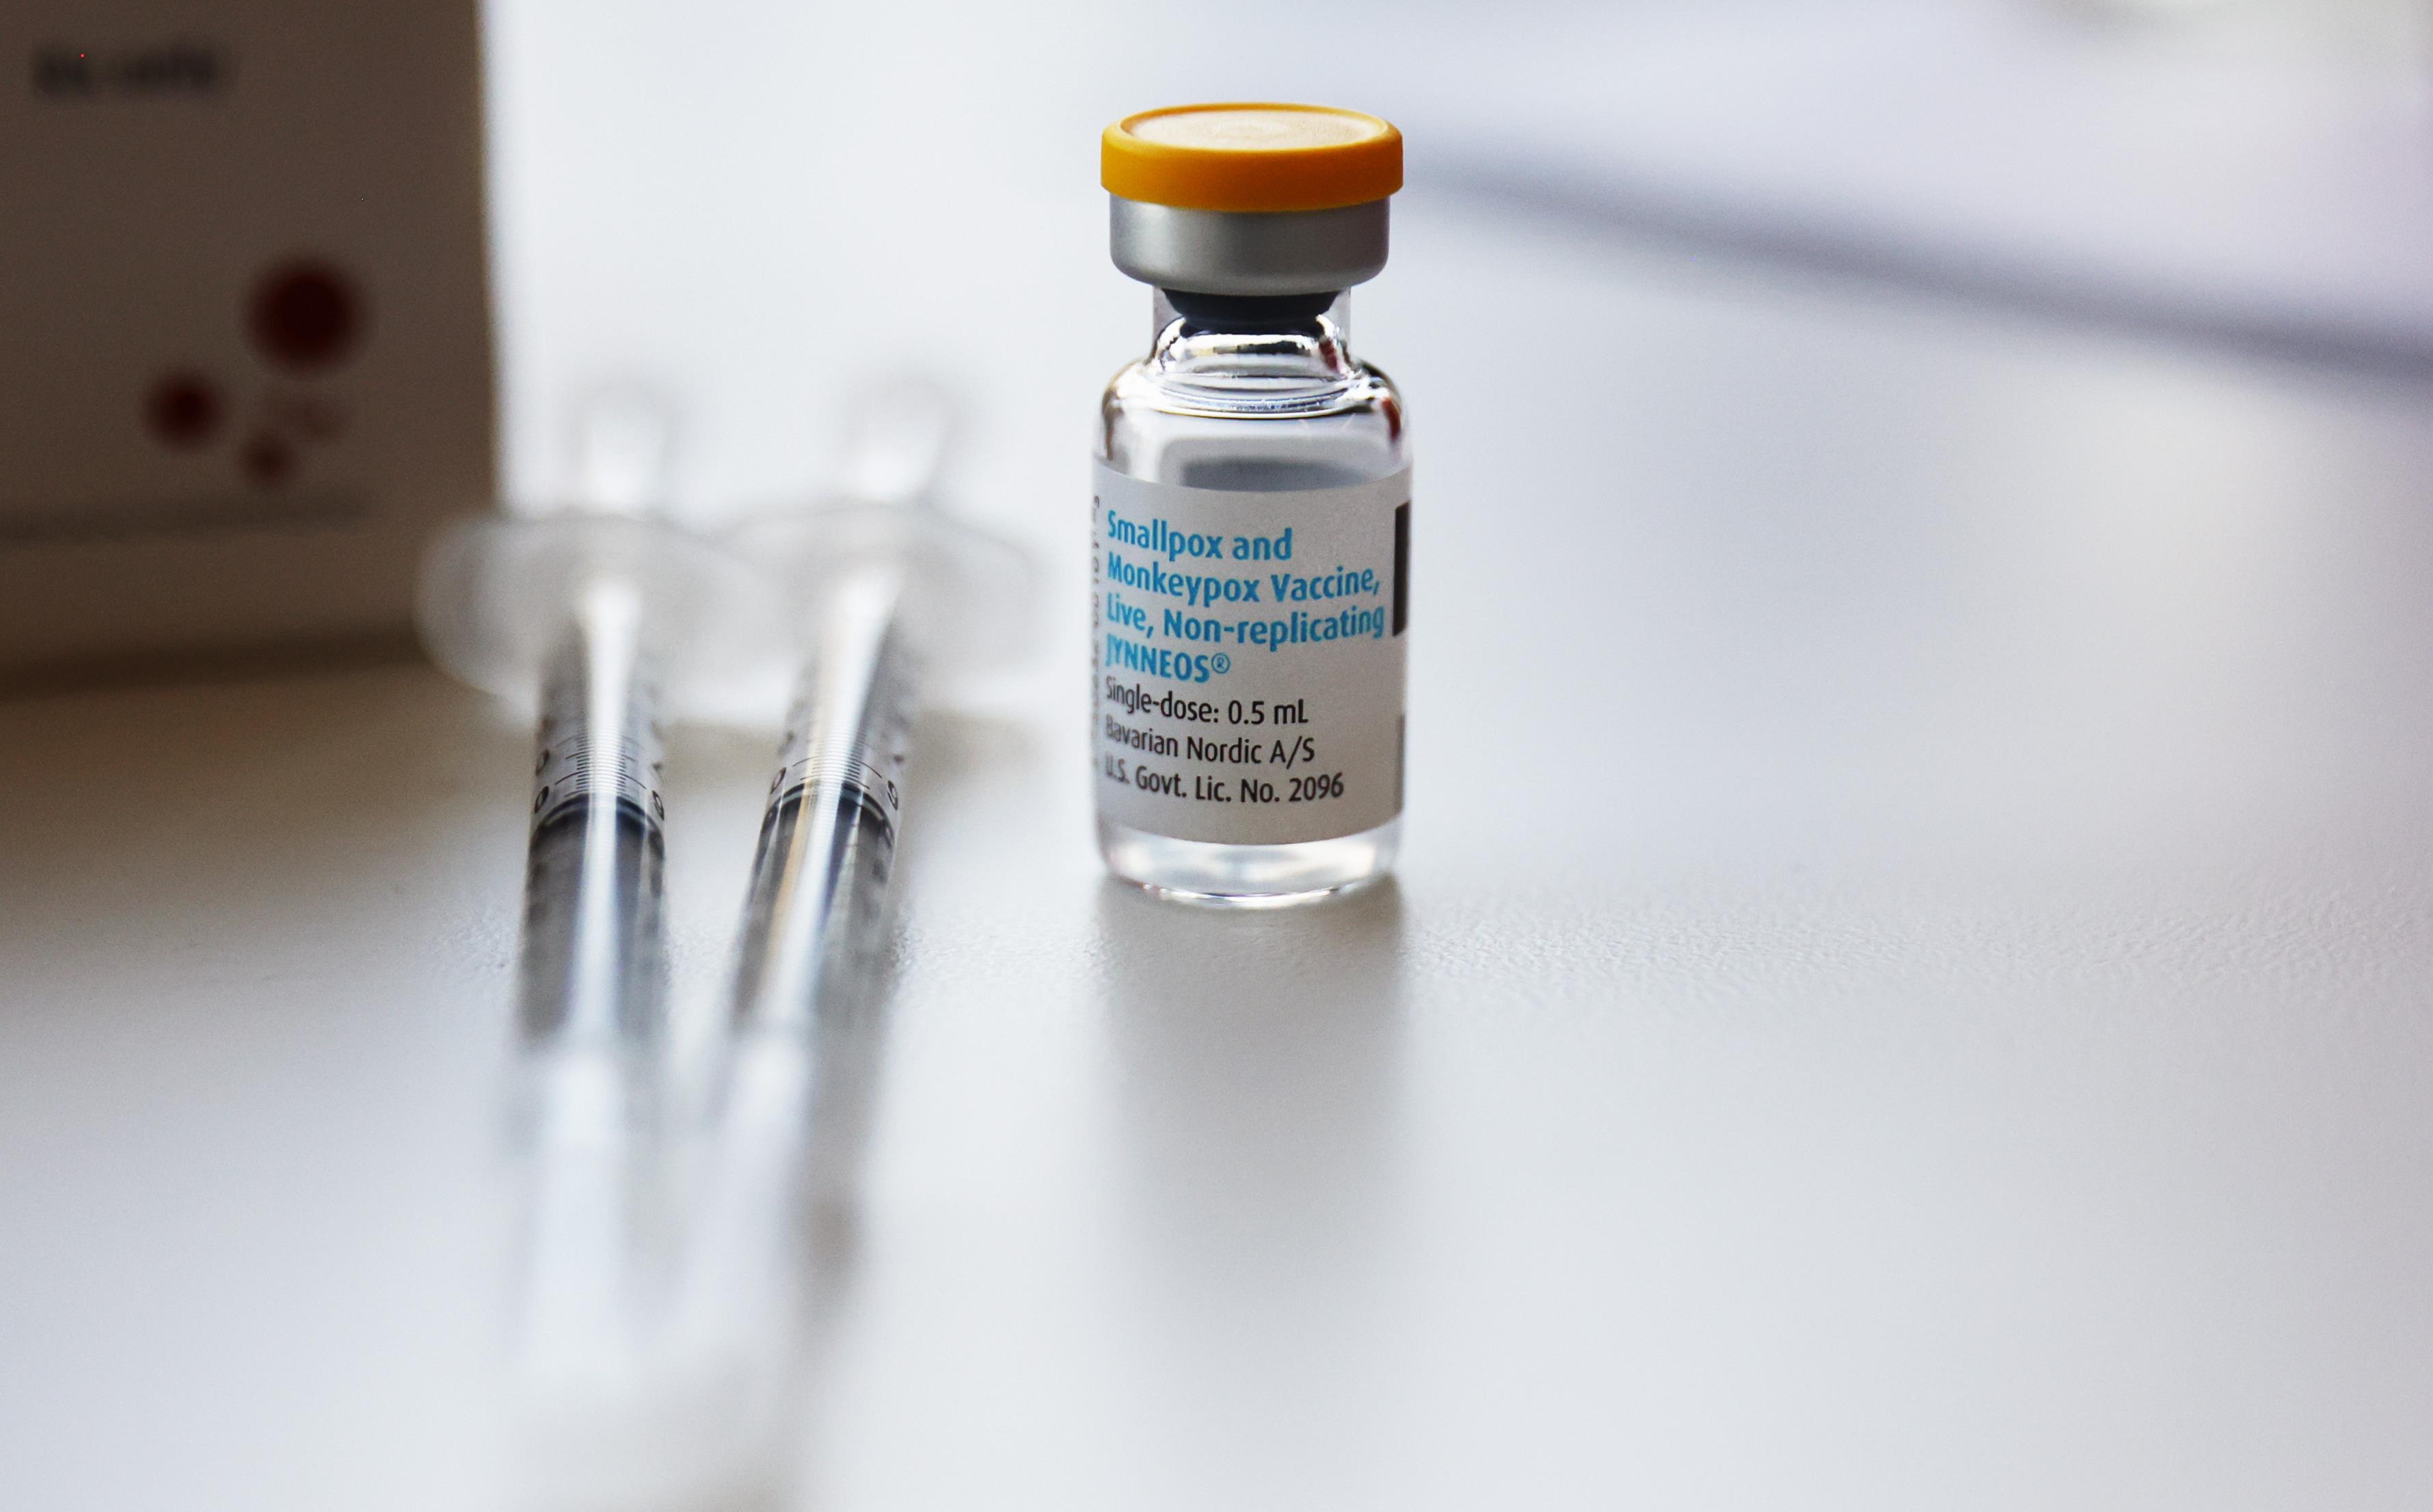 A bottle of vaccine next to two syringes.